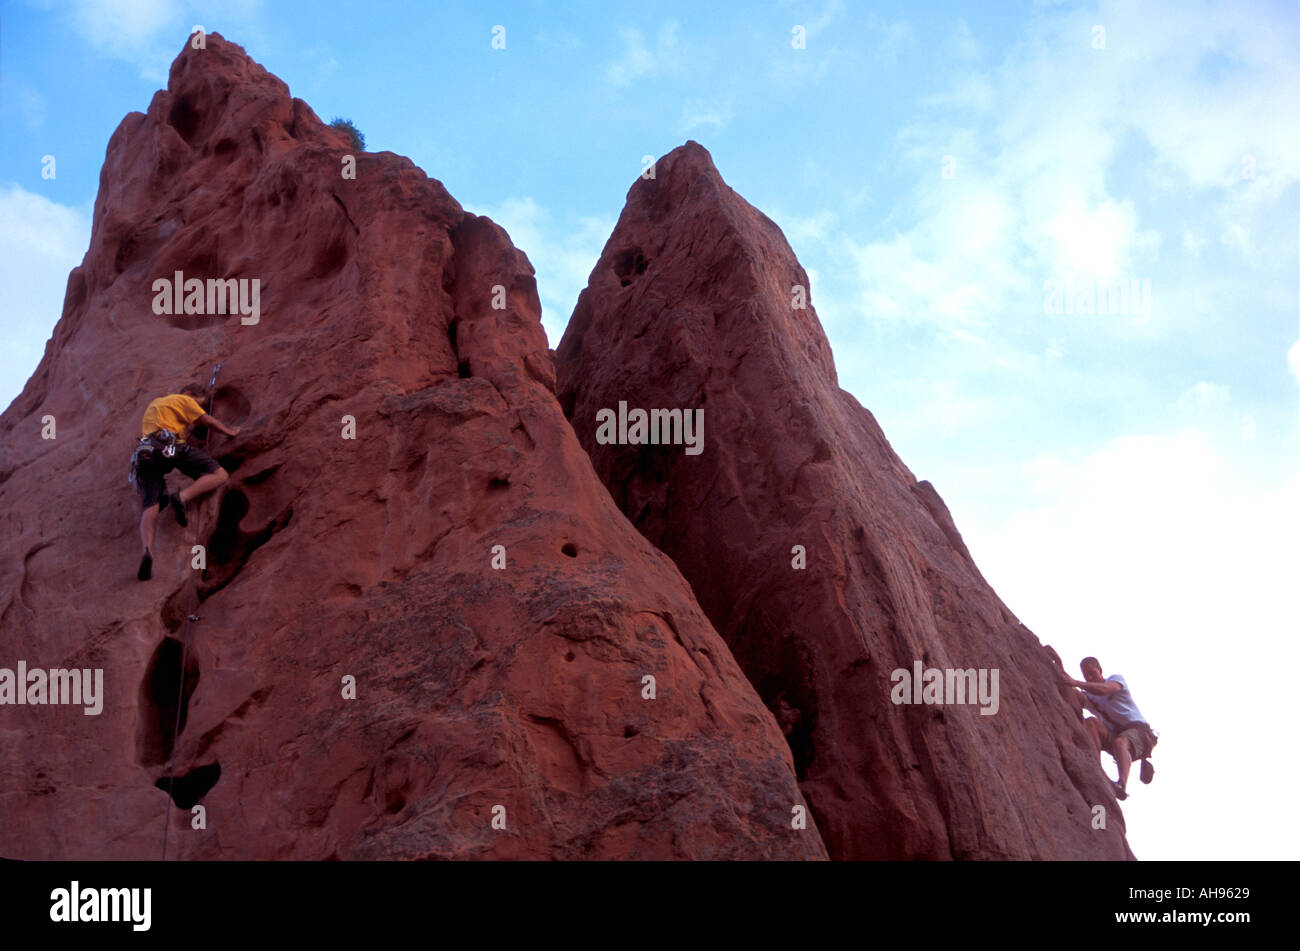 Rock Climbing On The Sandstone Formations Of Garden Of The Gods